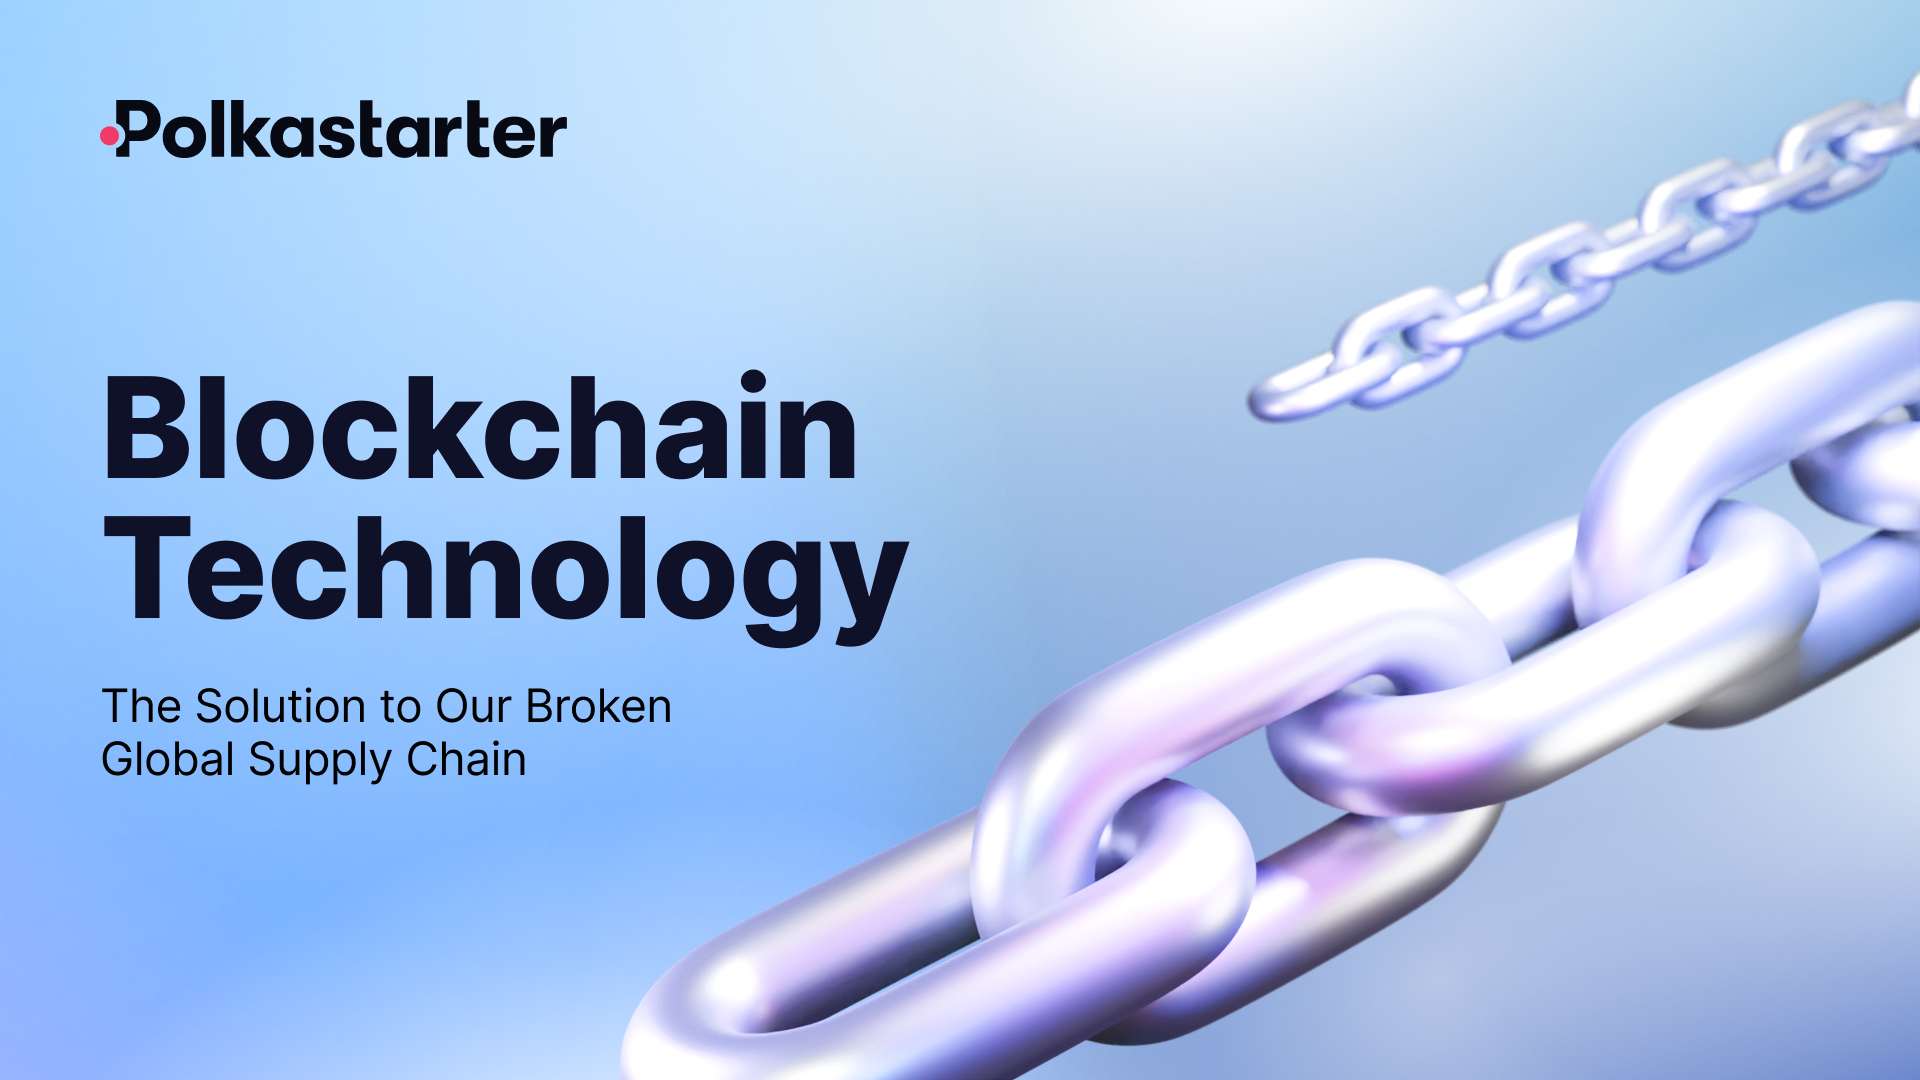 Blockchain Technology: The Solution to Our Broken Global Supply Chain